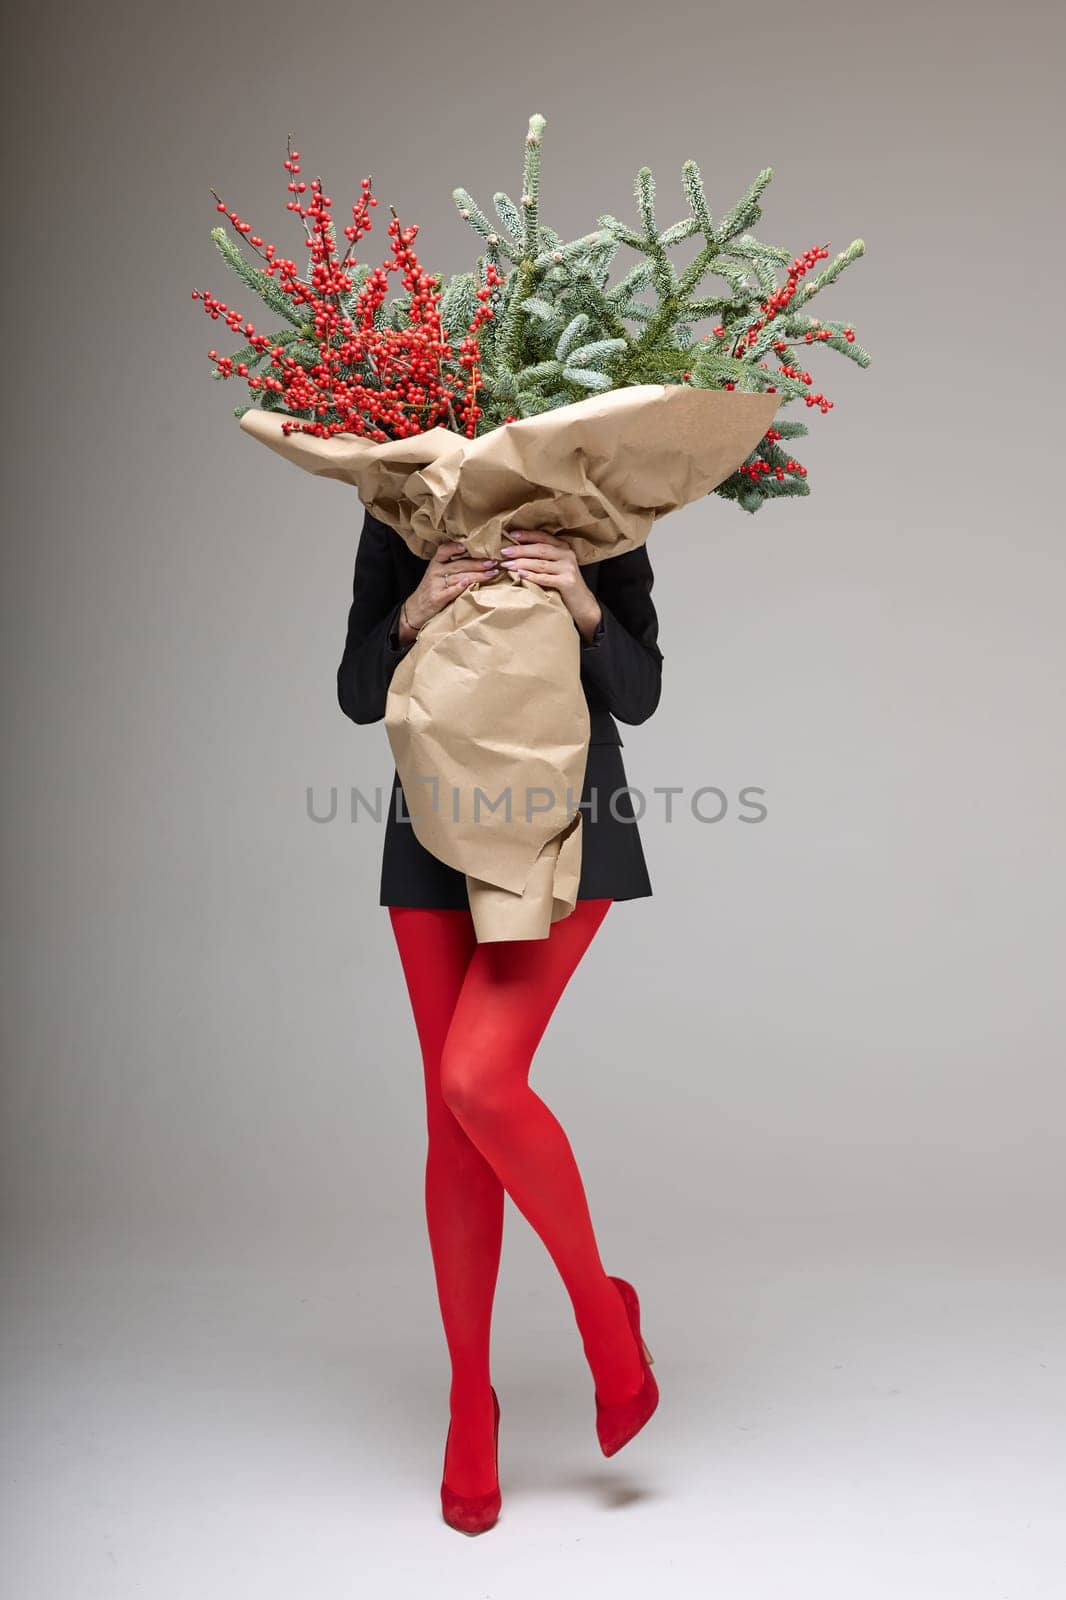 A long girl in red tights and high-heeled shoes holds a huge bouquet of fir branches and red berries wrapped in cardboard paper, she closes with a bouquet, photo studio with white background by vladimirdrozdin